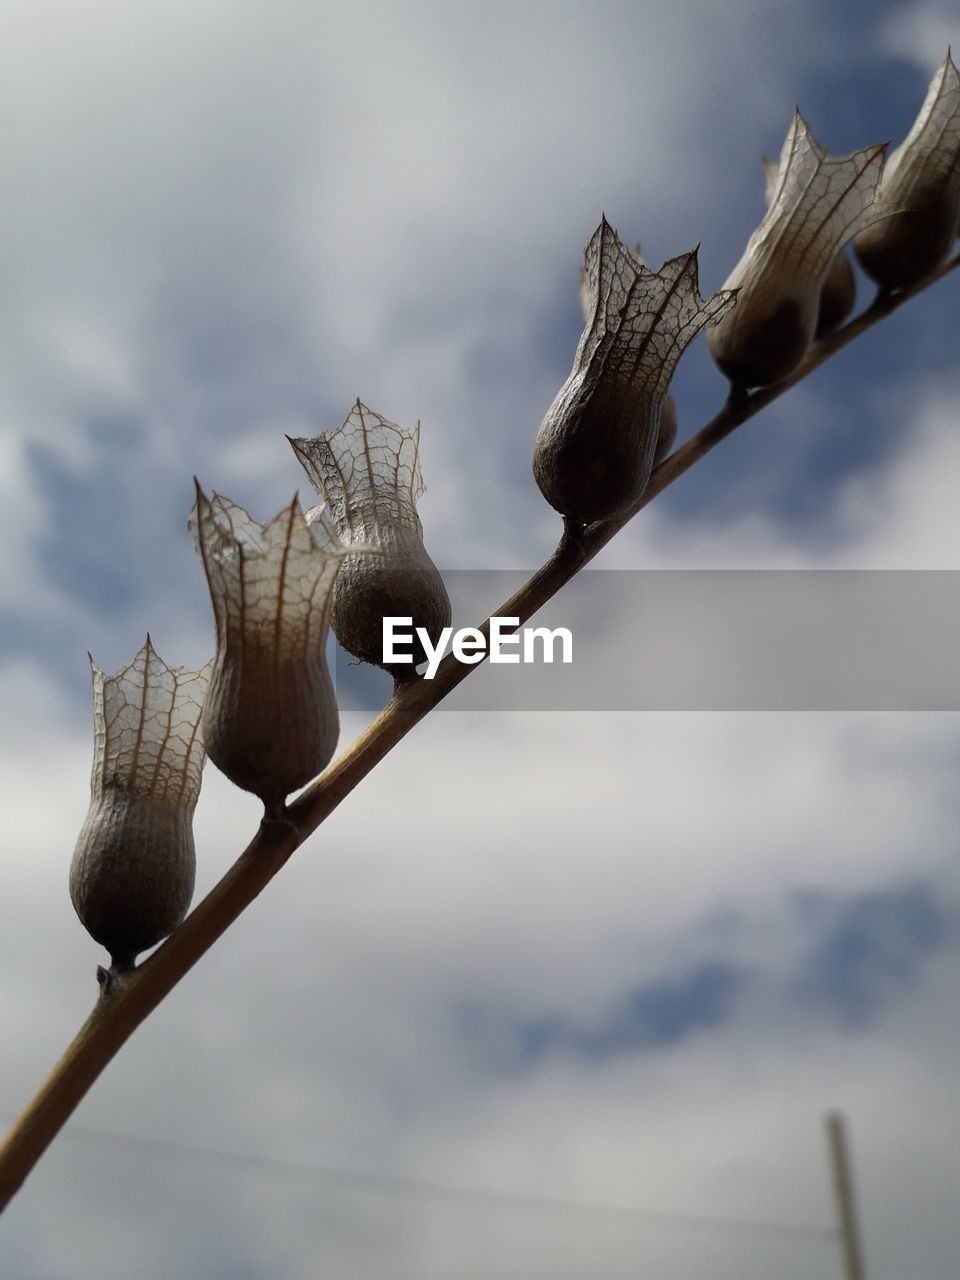 CLOSE-UP OF DRIED PLANT AGAINST SKY